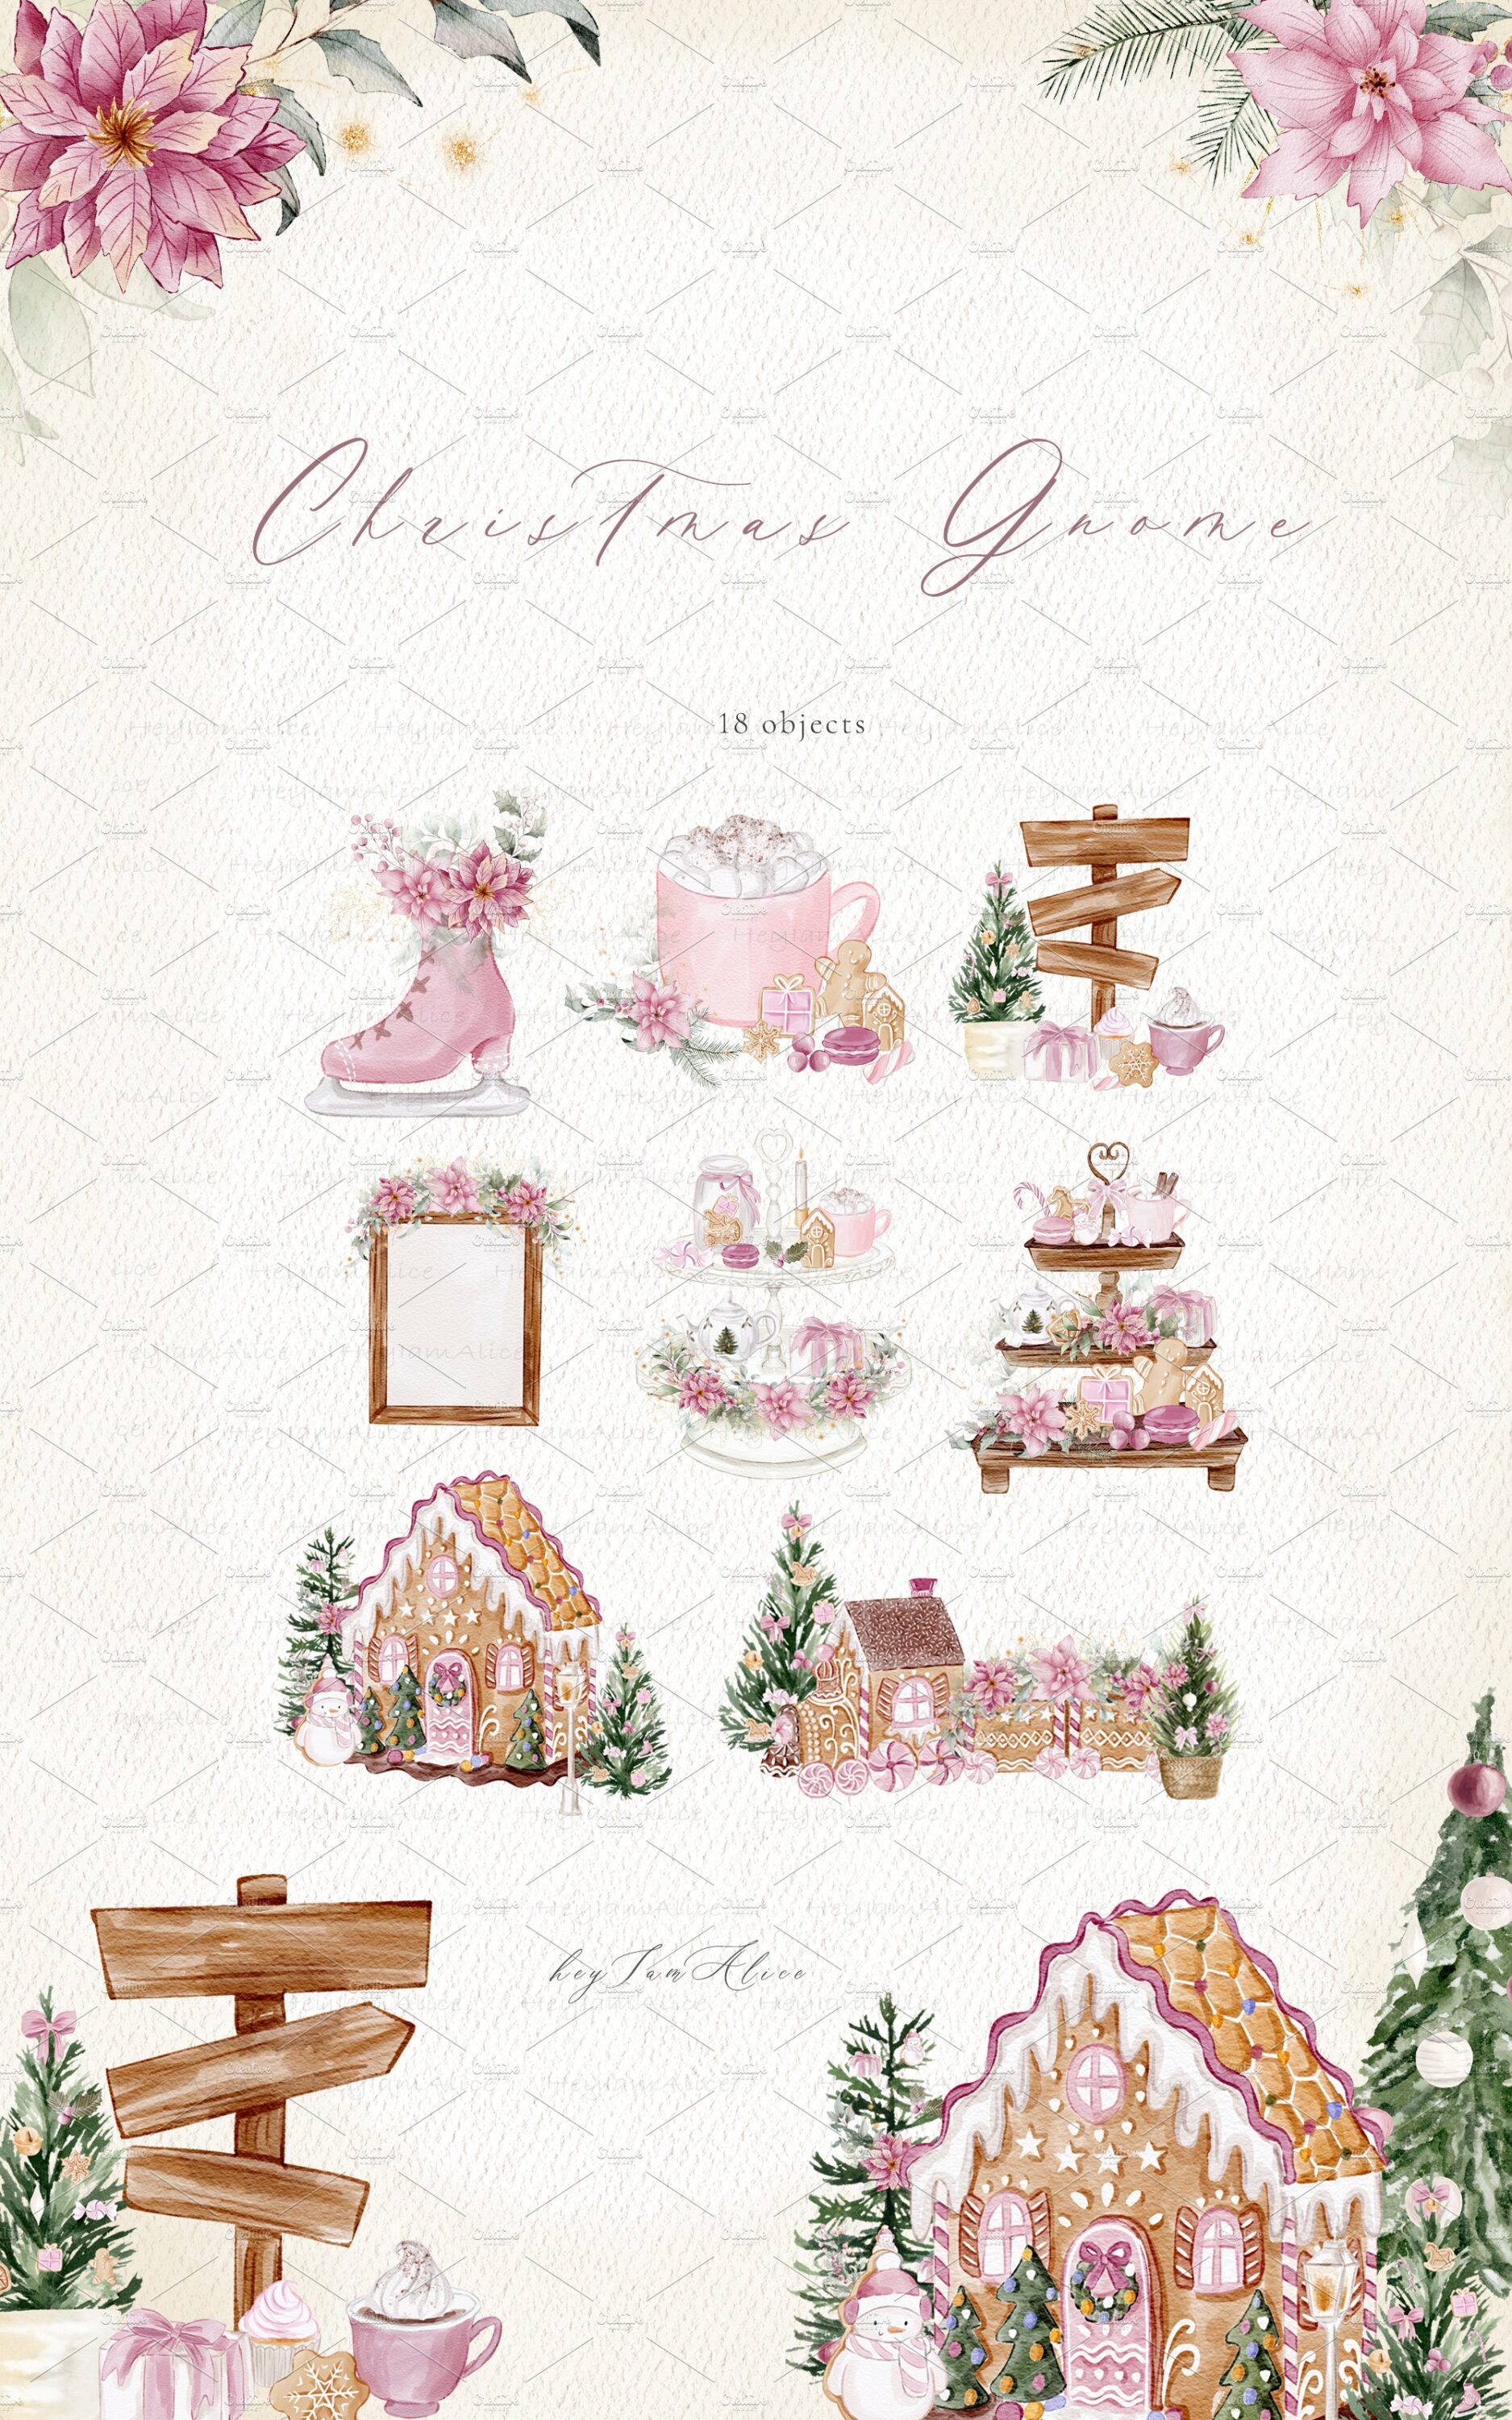 Stylish and beautiful pink elements for the full winter illustration.